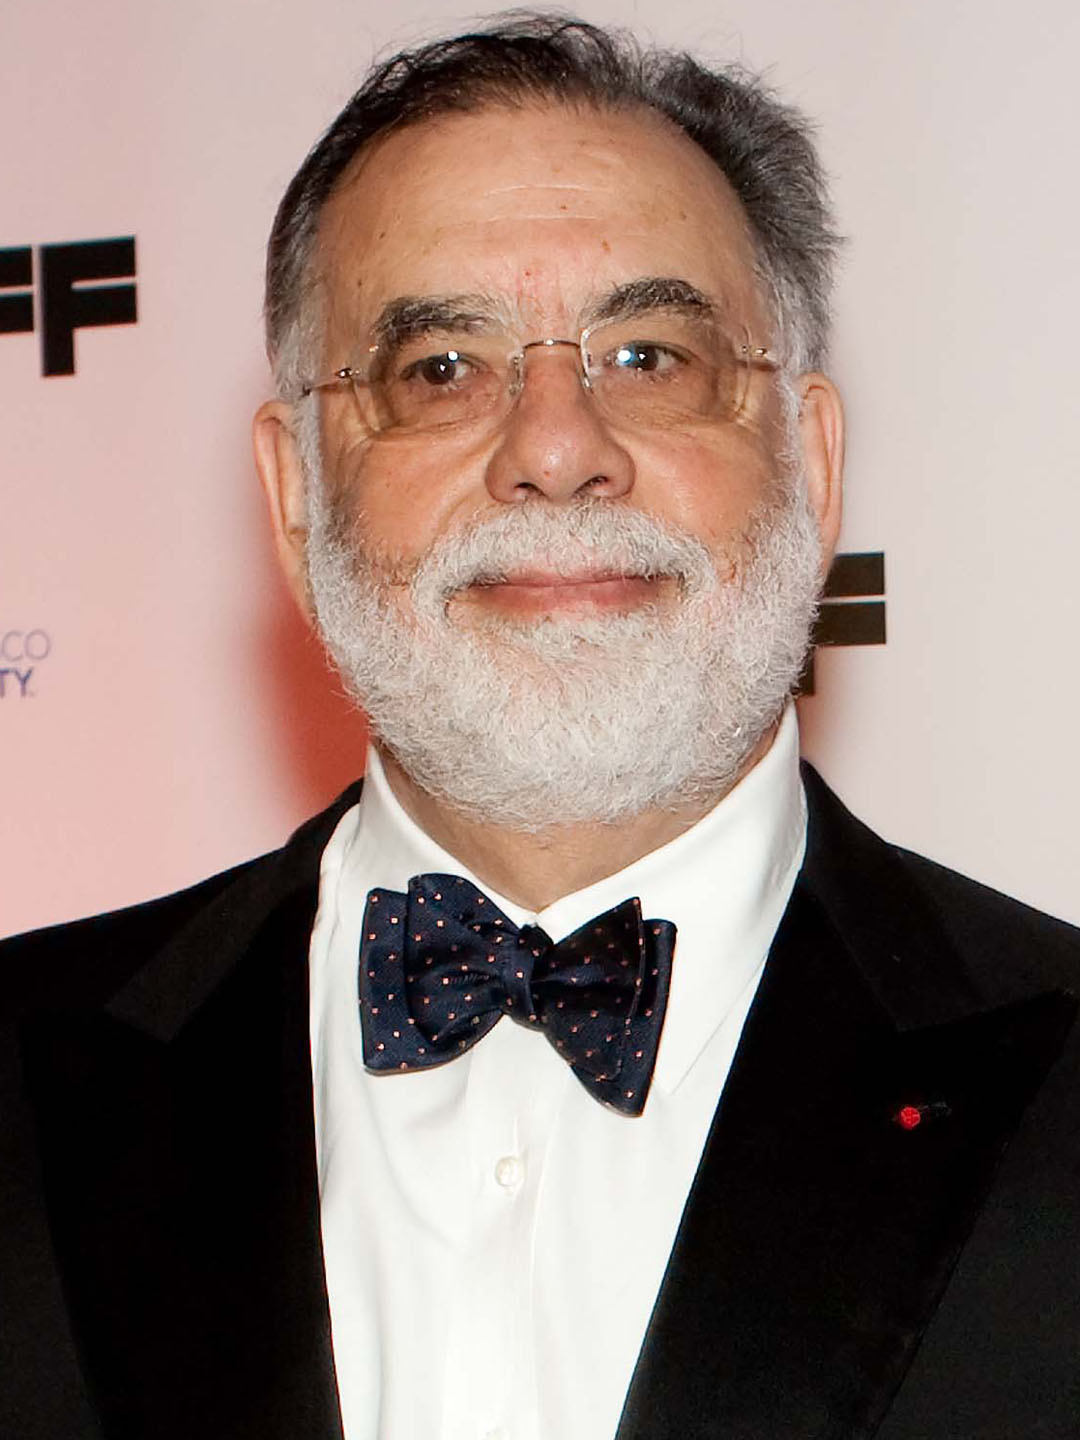 Image result for francis ford coppola